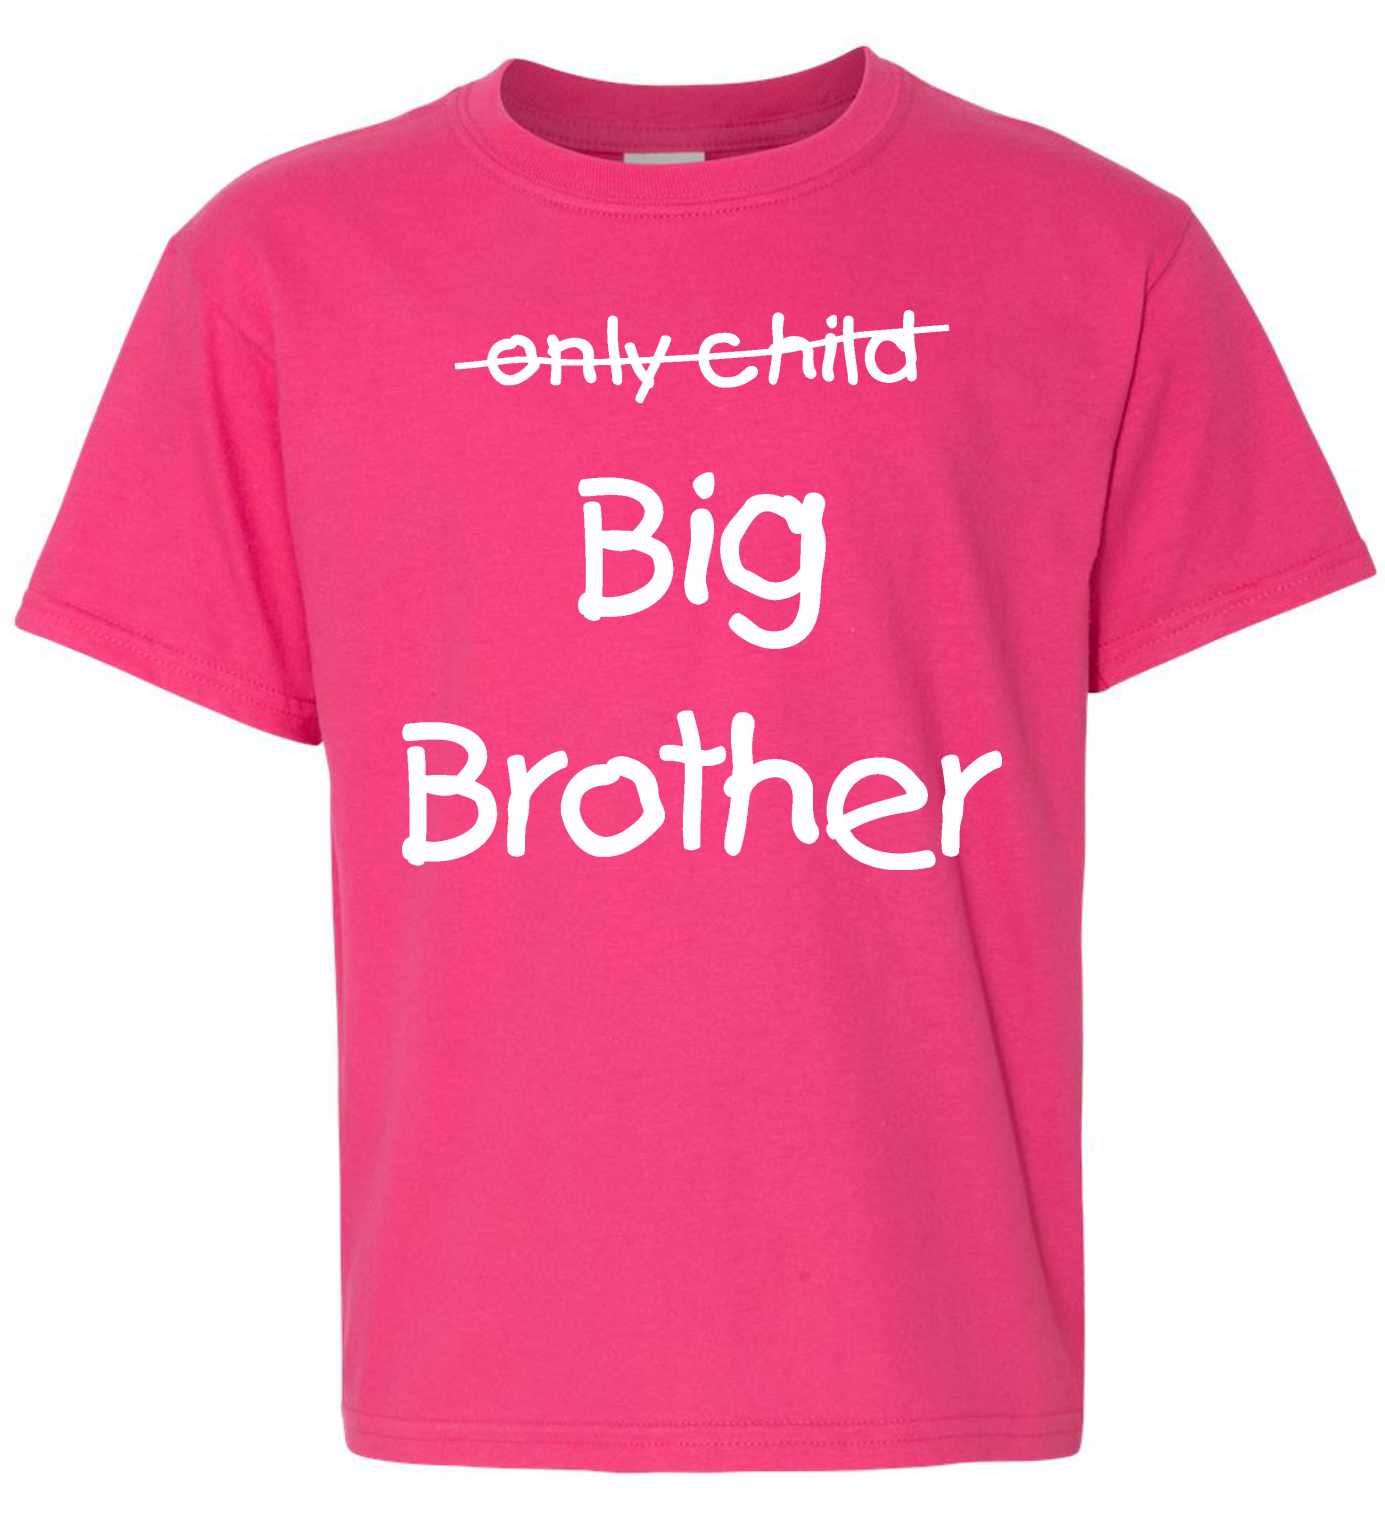 Only Child BIG BROTHER on Kids T-Shirt (#965-201)